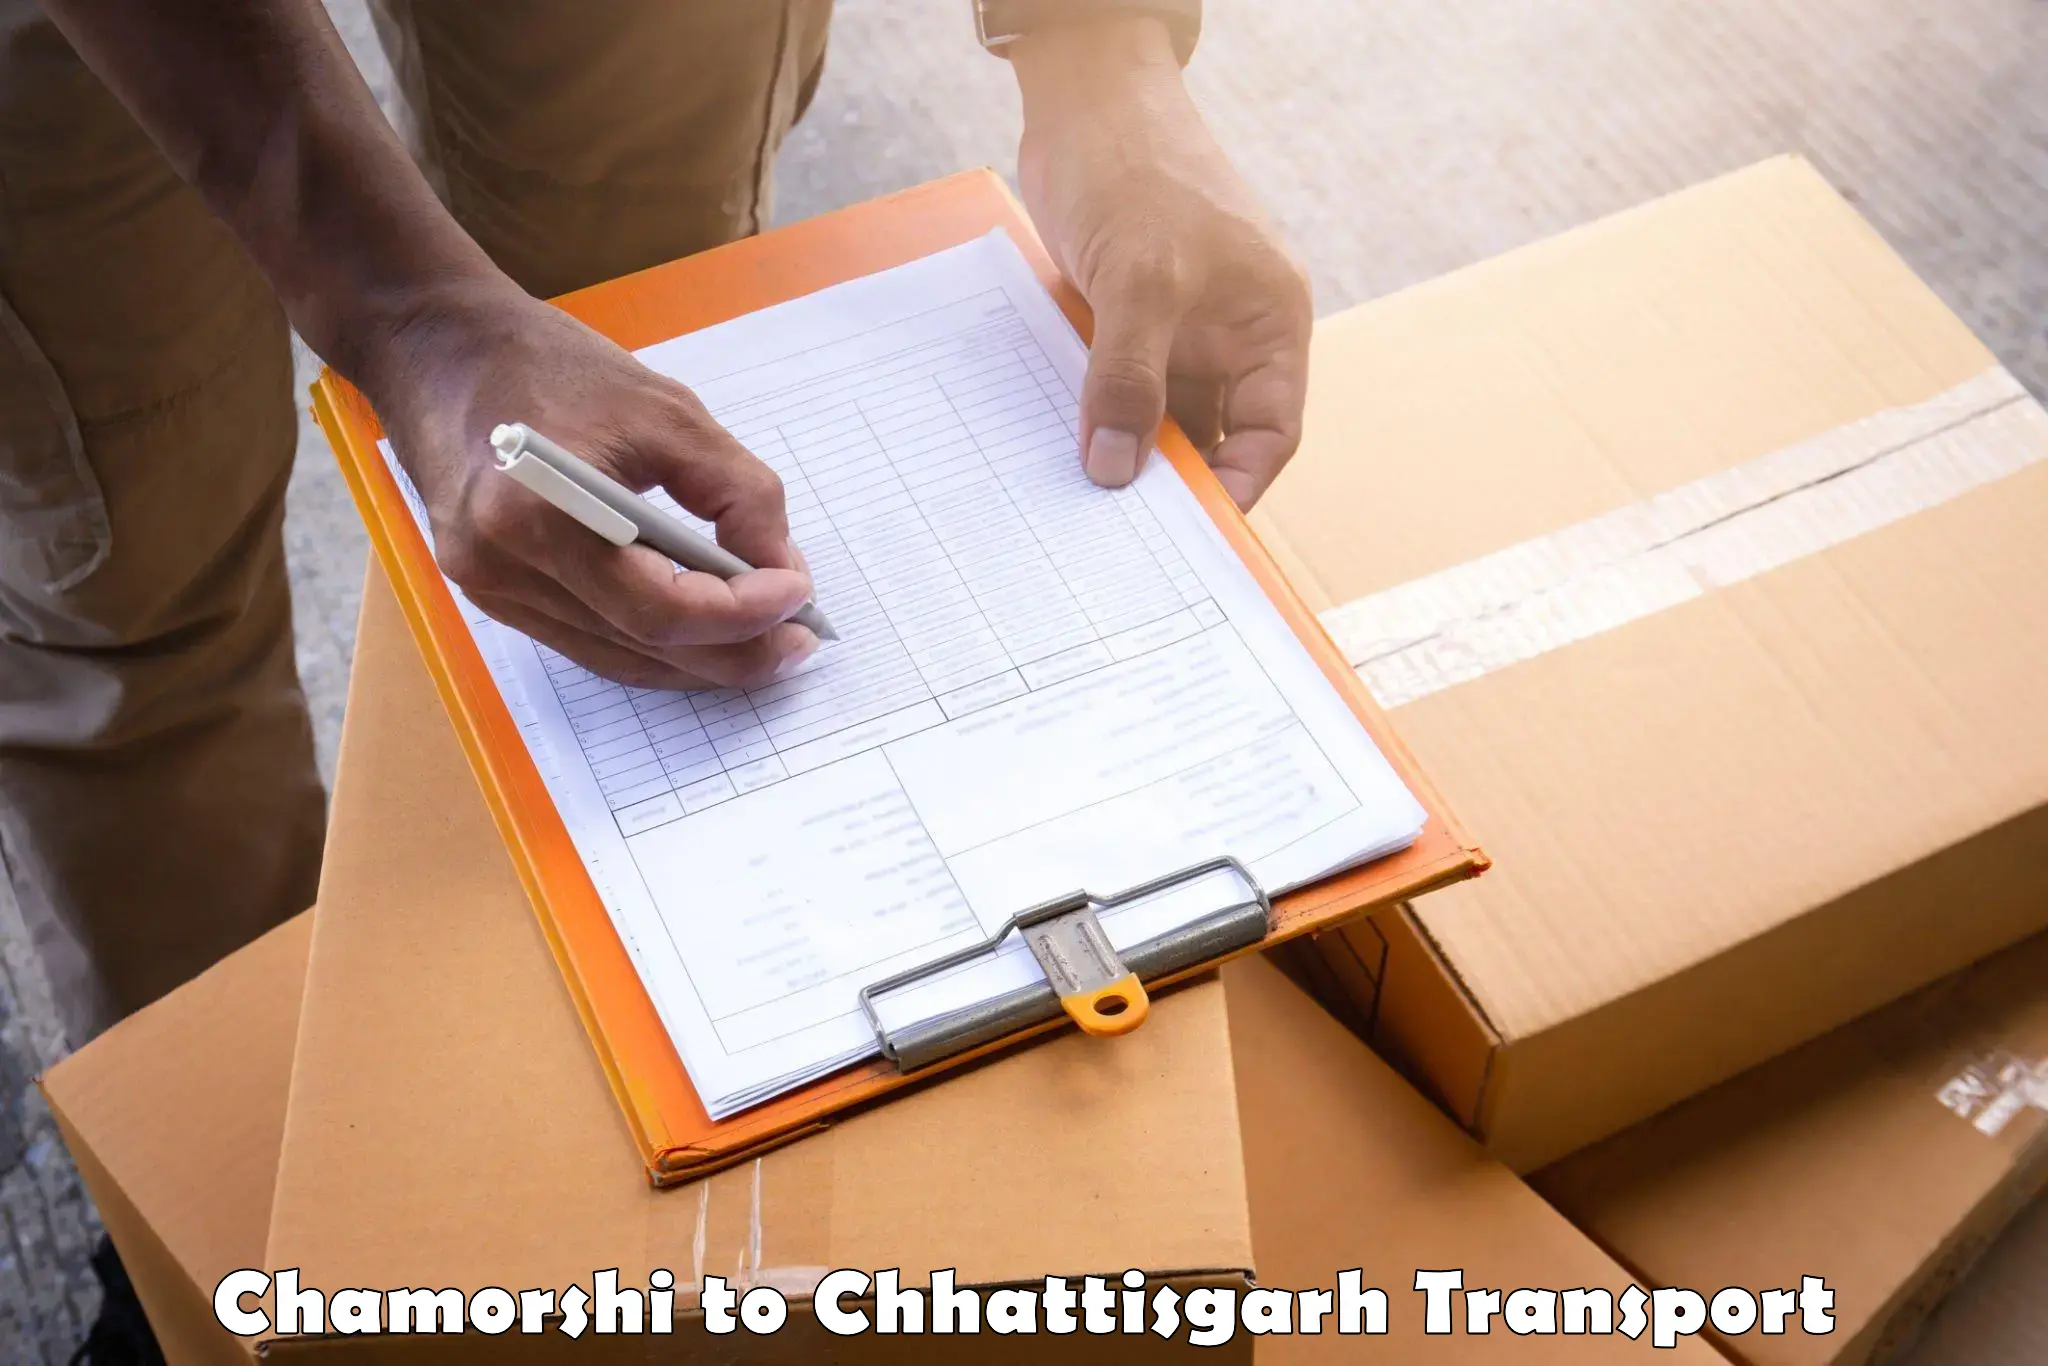 Air freight transport services Chamorshi to Dhamtari